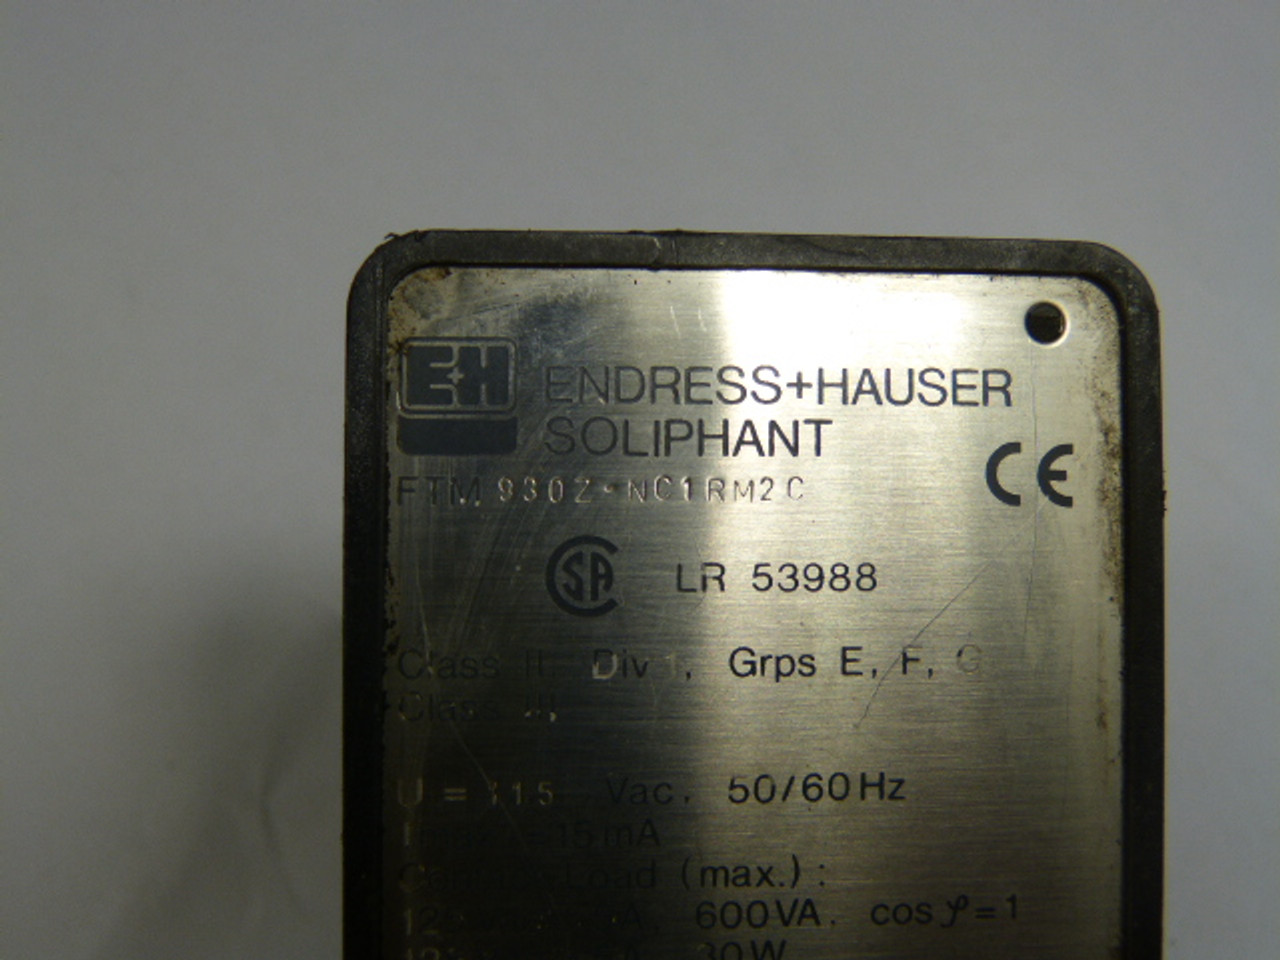 Endress And Hauser FTM930Z-N-C-1-RM2-C Level Limit Switch 1-1/2" NPT USED